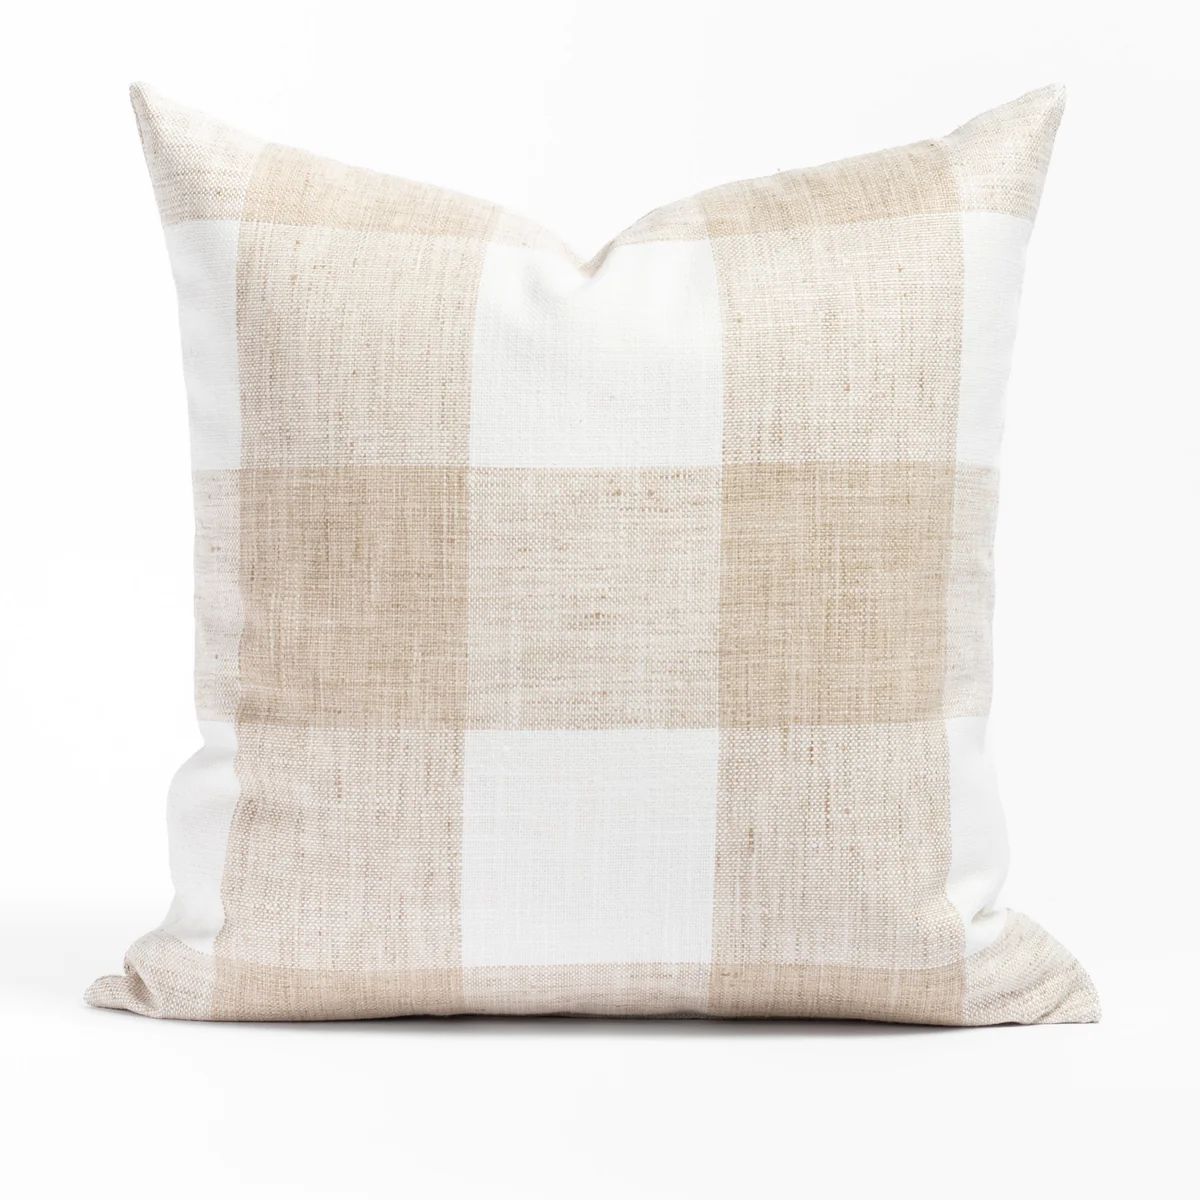 Oliver Check 20x20 Pillow, Natural | Tonic Living